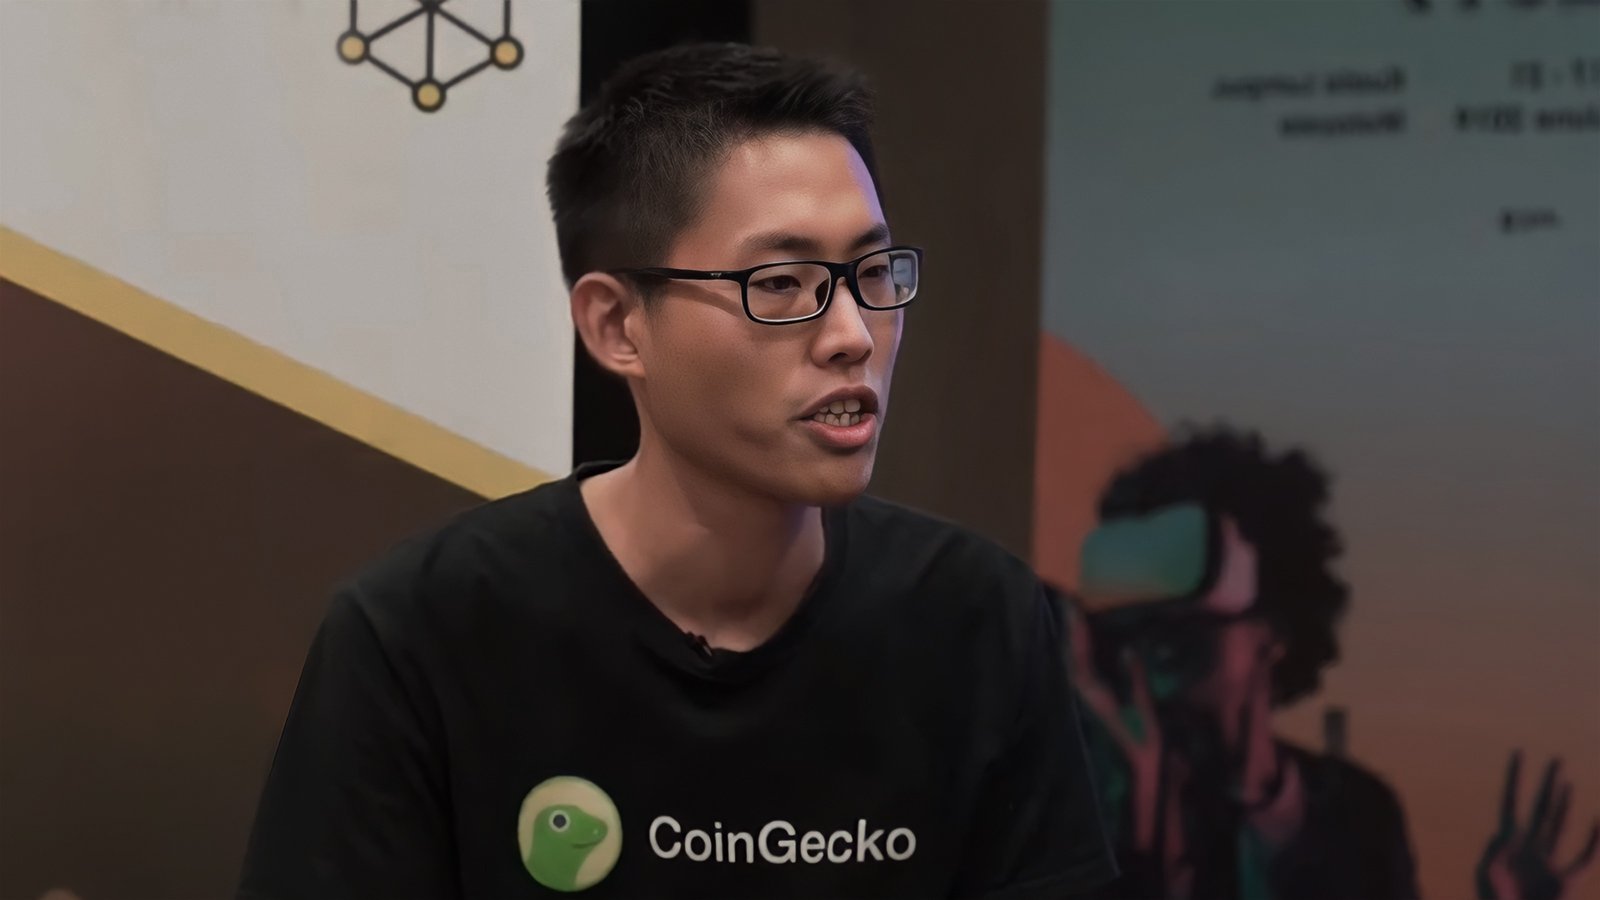 Here’s How To Take Advantage of Ethereum Merge: Coingecko Co-Founder